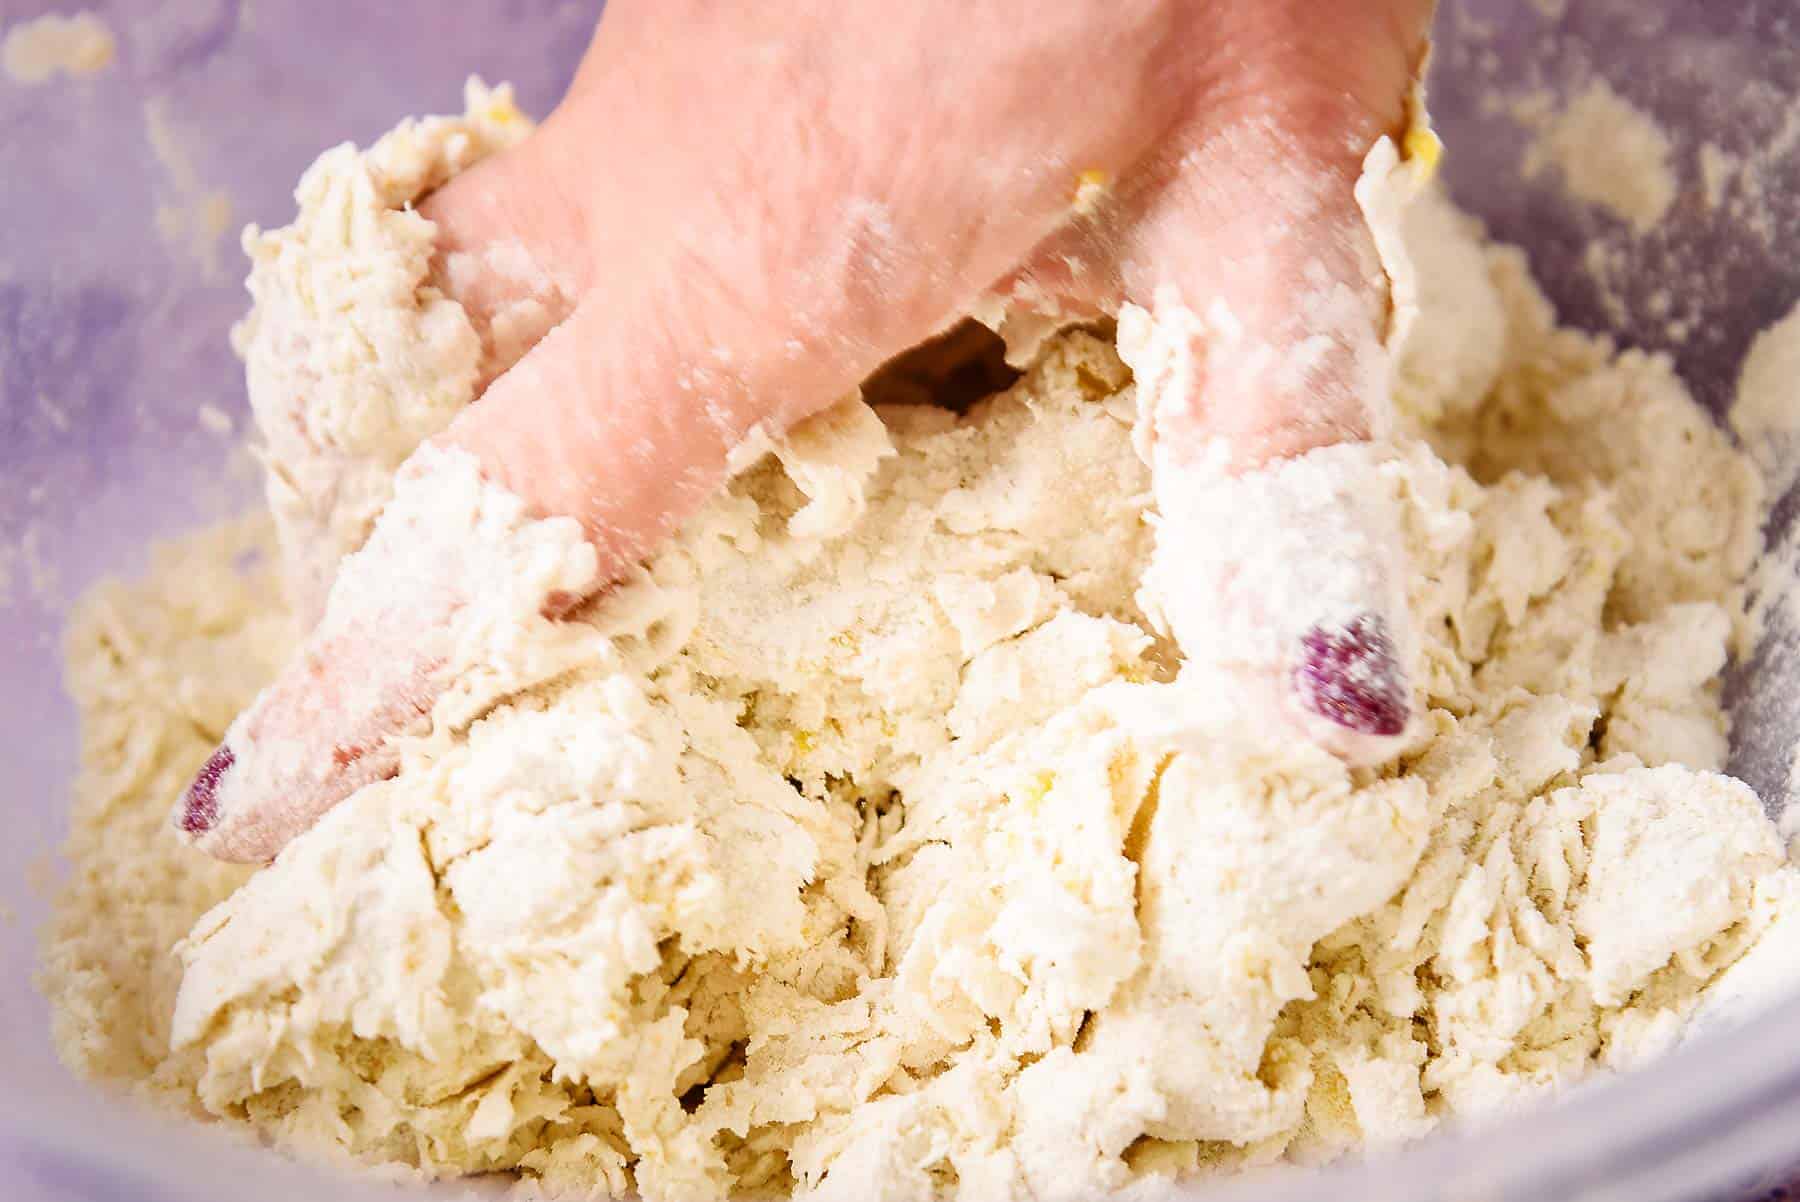 Bringing the ingredients together to form a dough